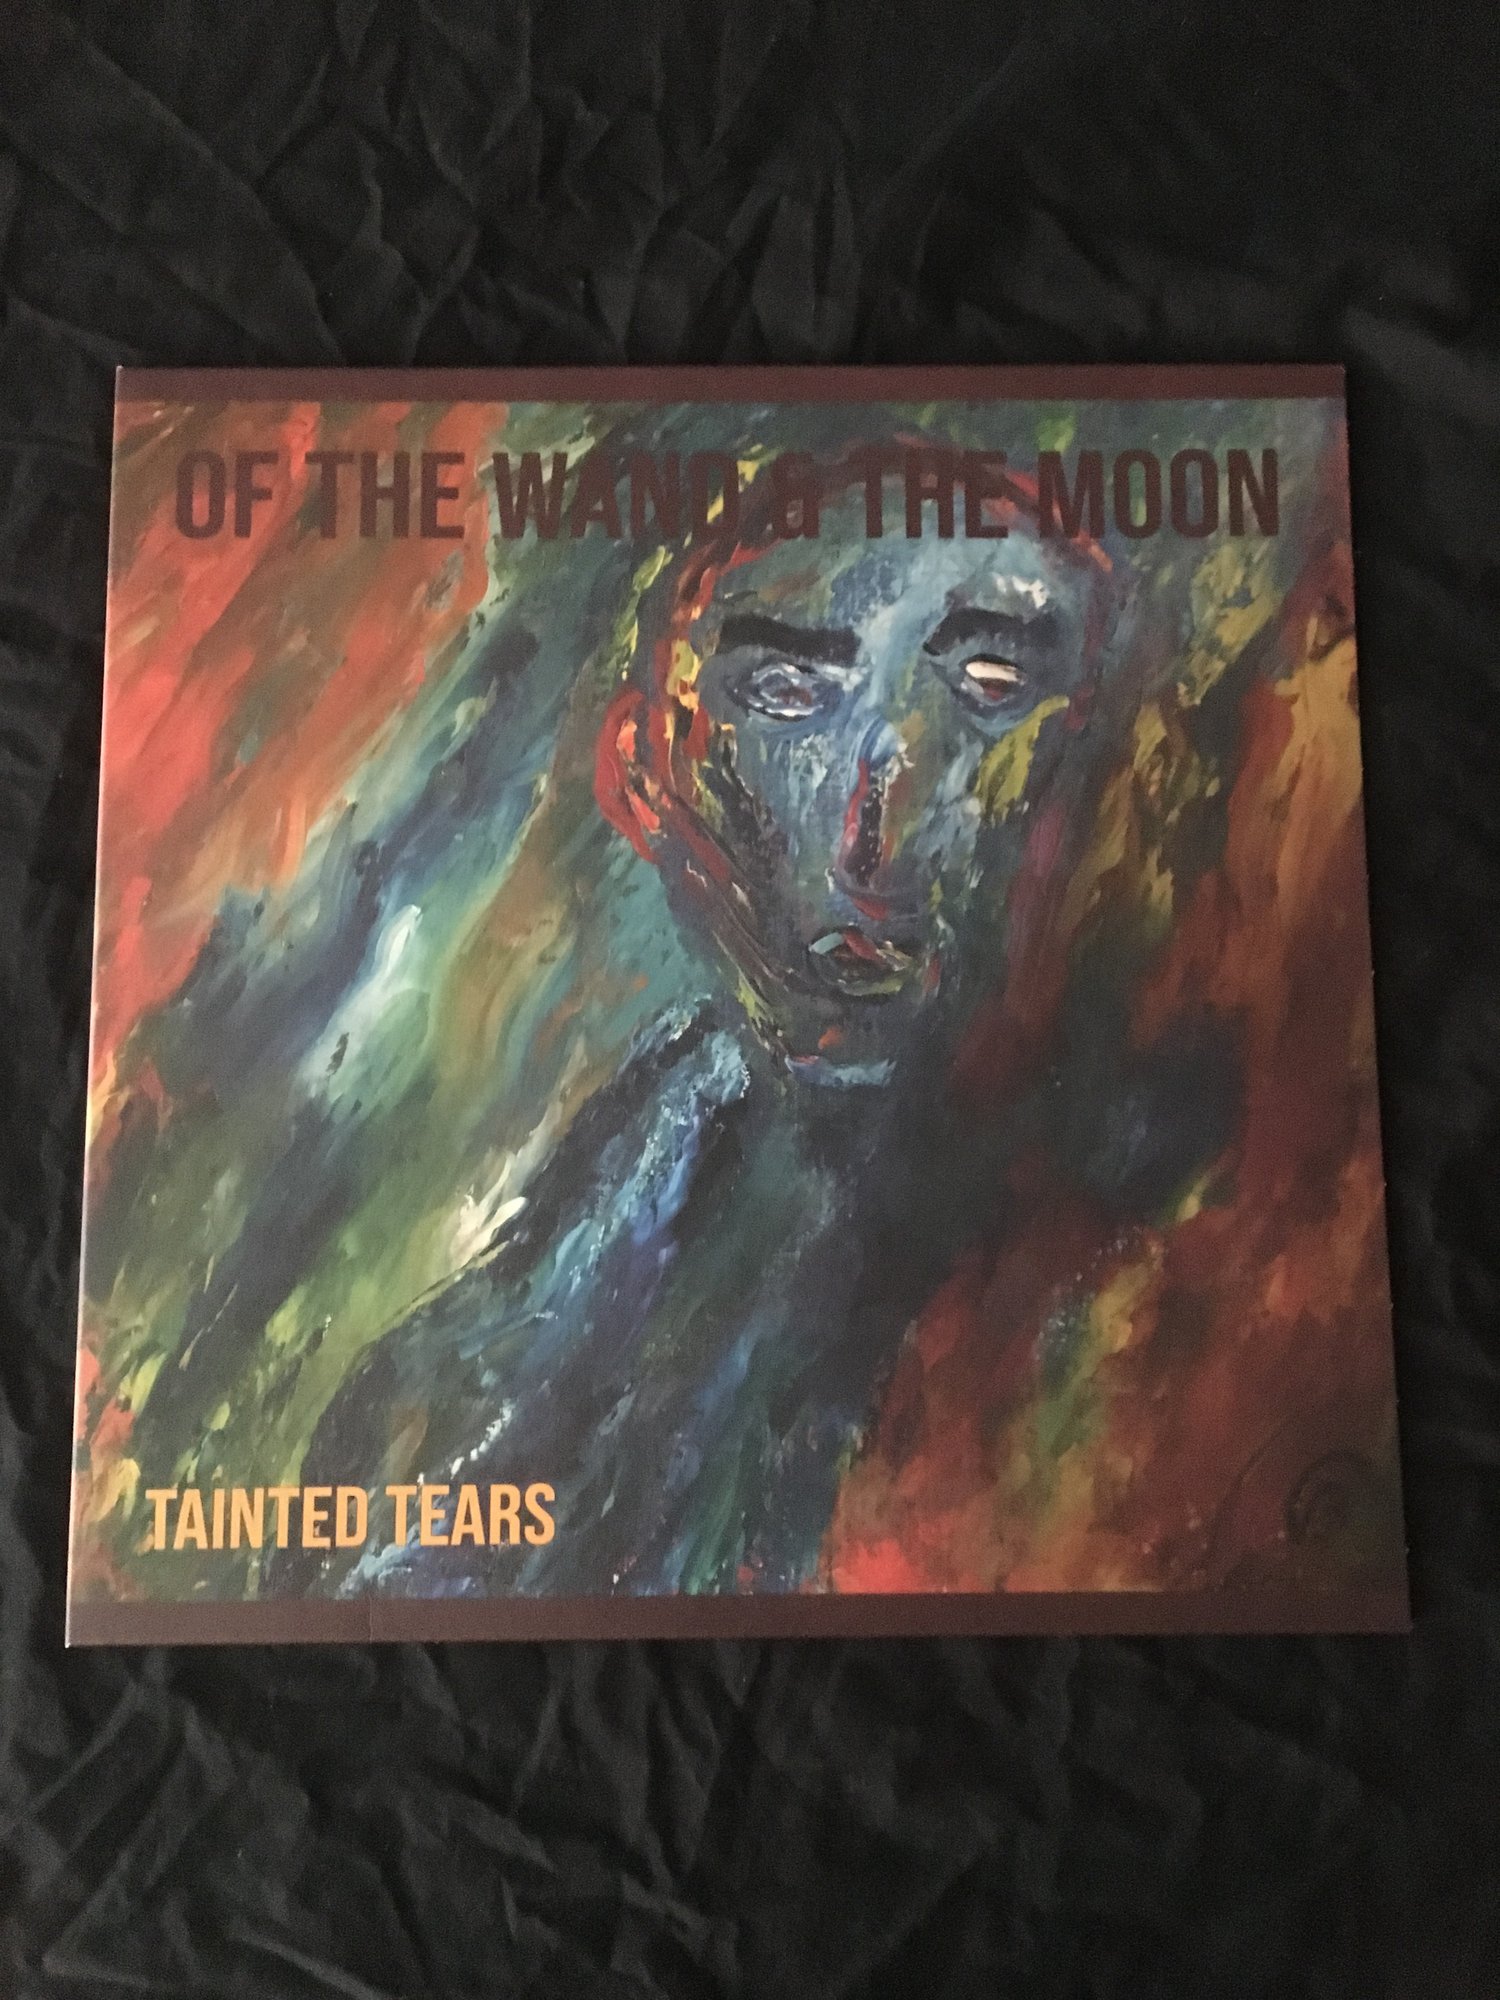 OF THE WAND & THE MOON – TAINTED TEARS LP (Tesco)